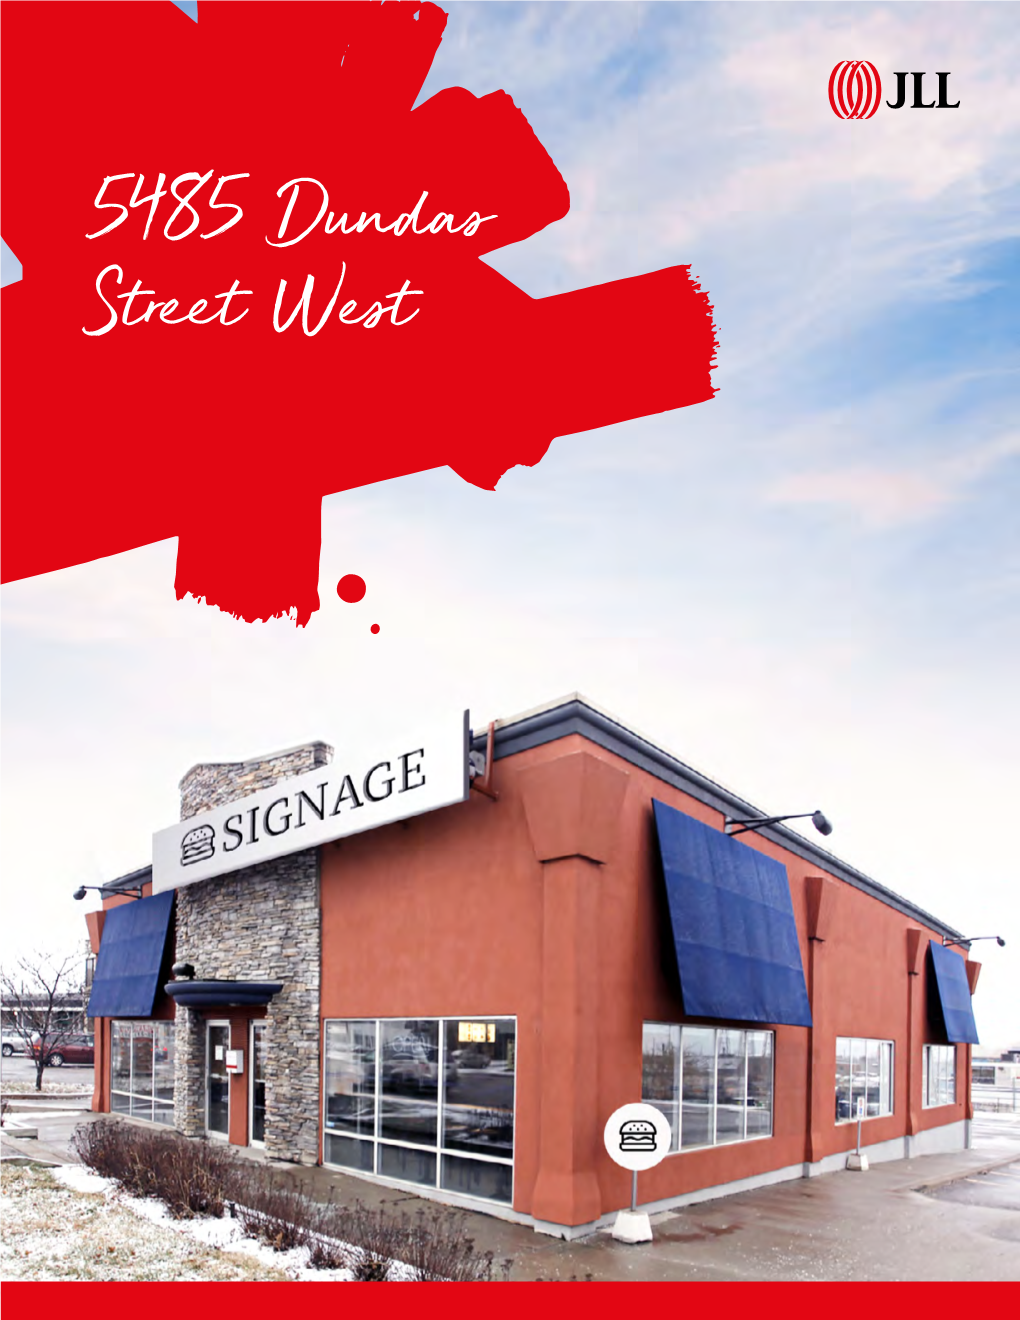 5485 Dundas Street West RETAIL LEASING OPPORTUNITY 3,000 SF Free-Stand Drive-Thru the Opportunity